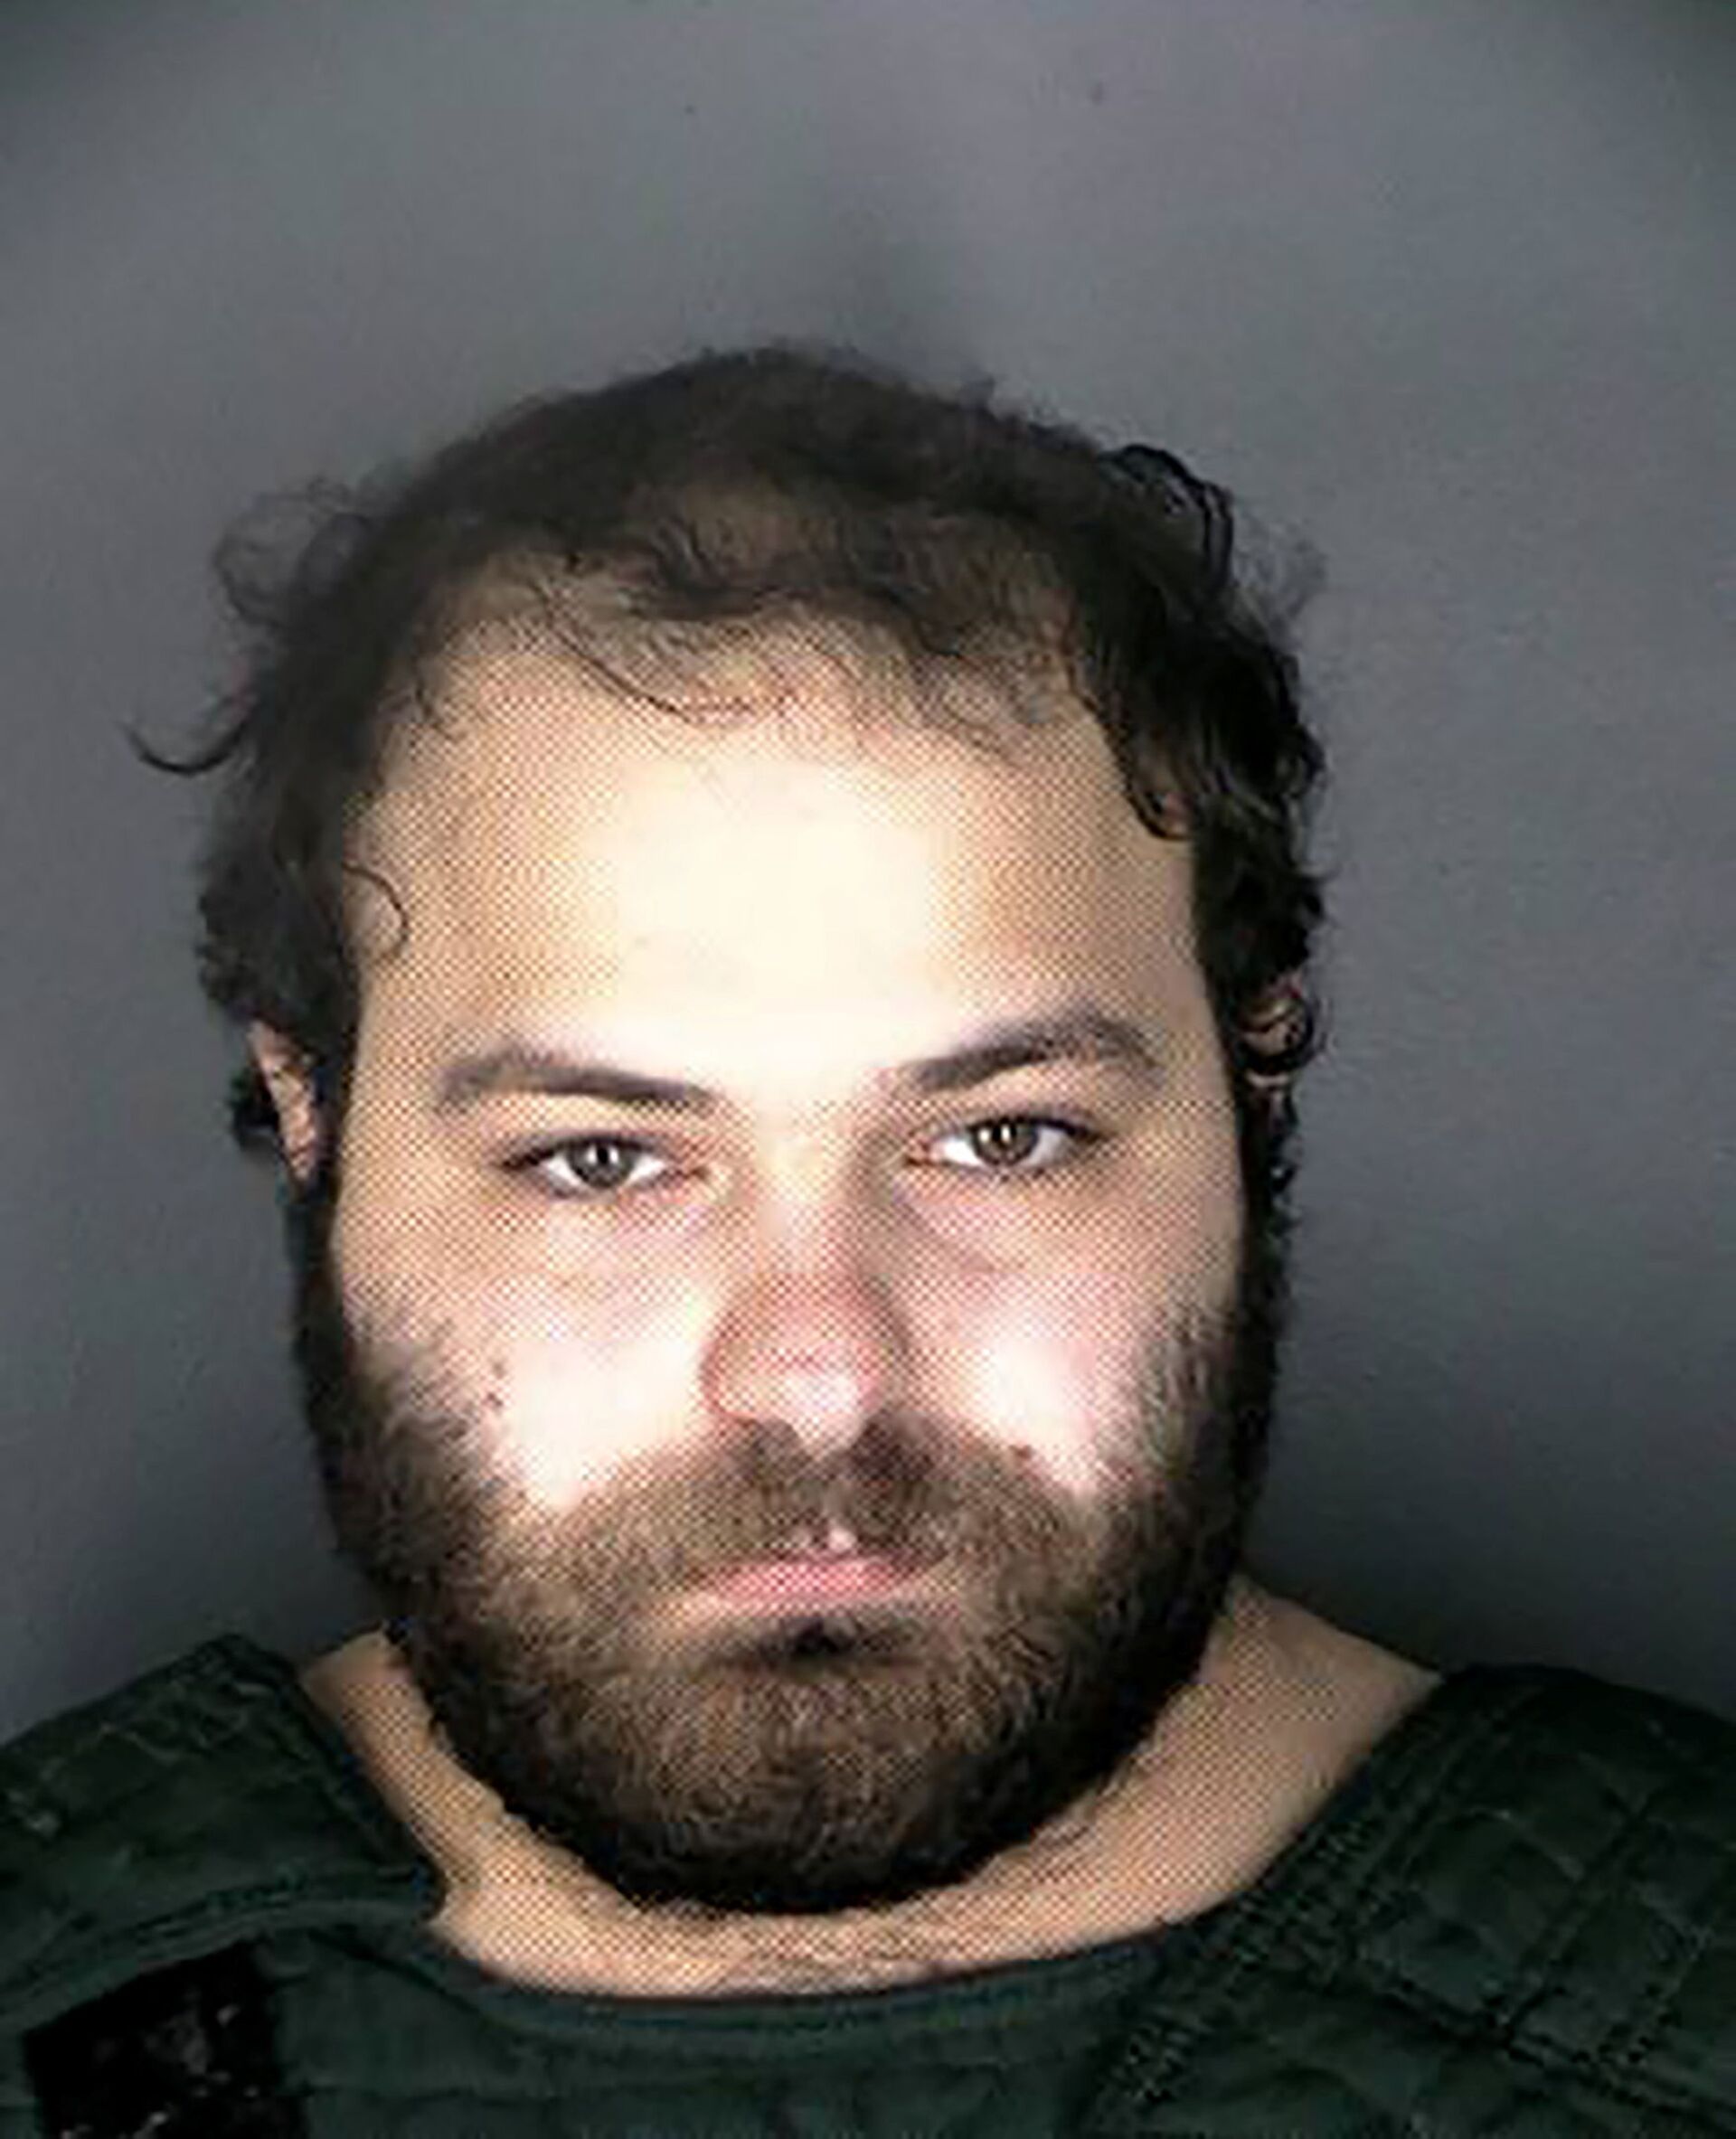 Ahmad Al Aliwi Alissa, 21, of Arvada, identified by police as the suspect in a mass shooting at King Soopers grocery store, poses for a county jail booking photograph in Boulder, Colorado, U.S. March 23, 2021 - Sputnik International, 1920, 04.12.2021